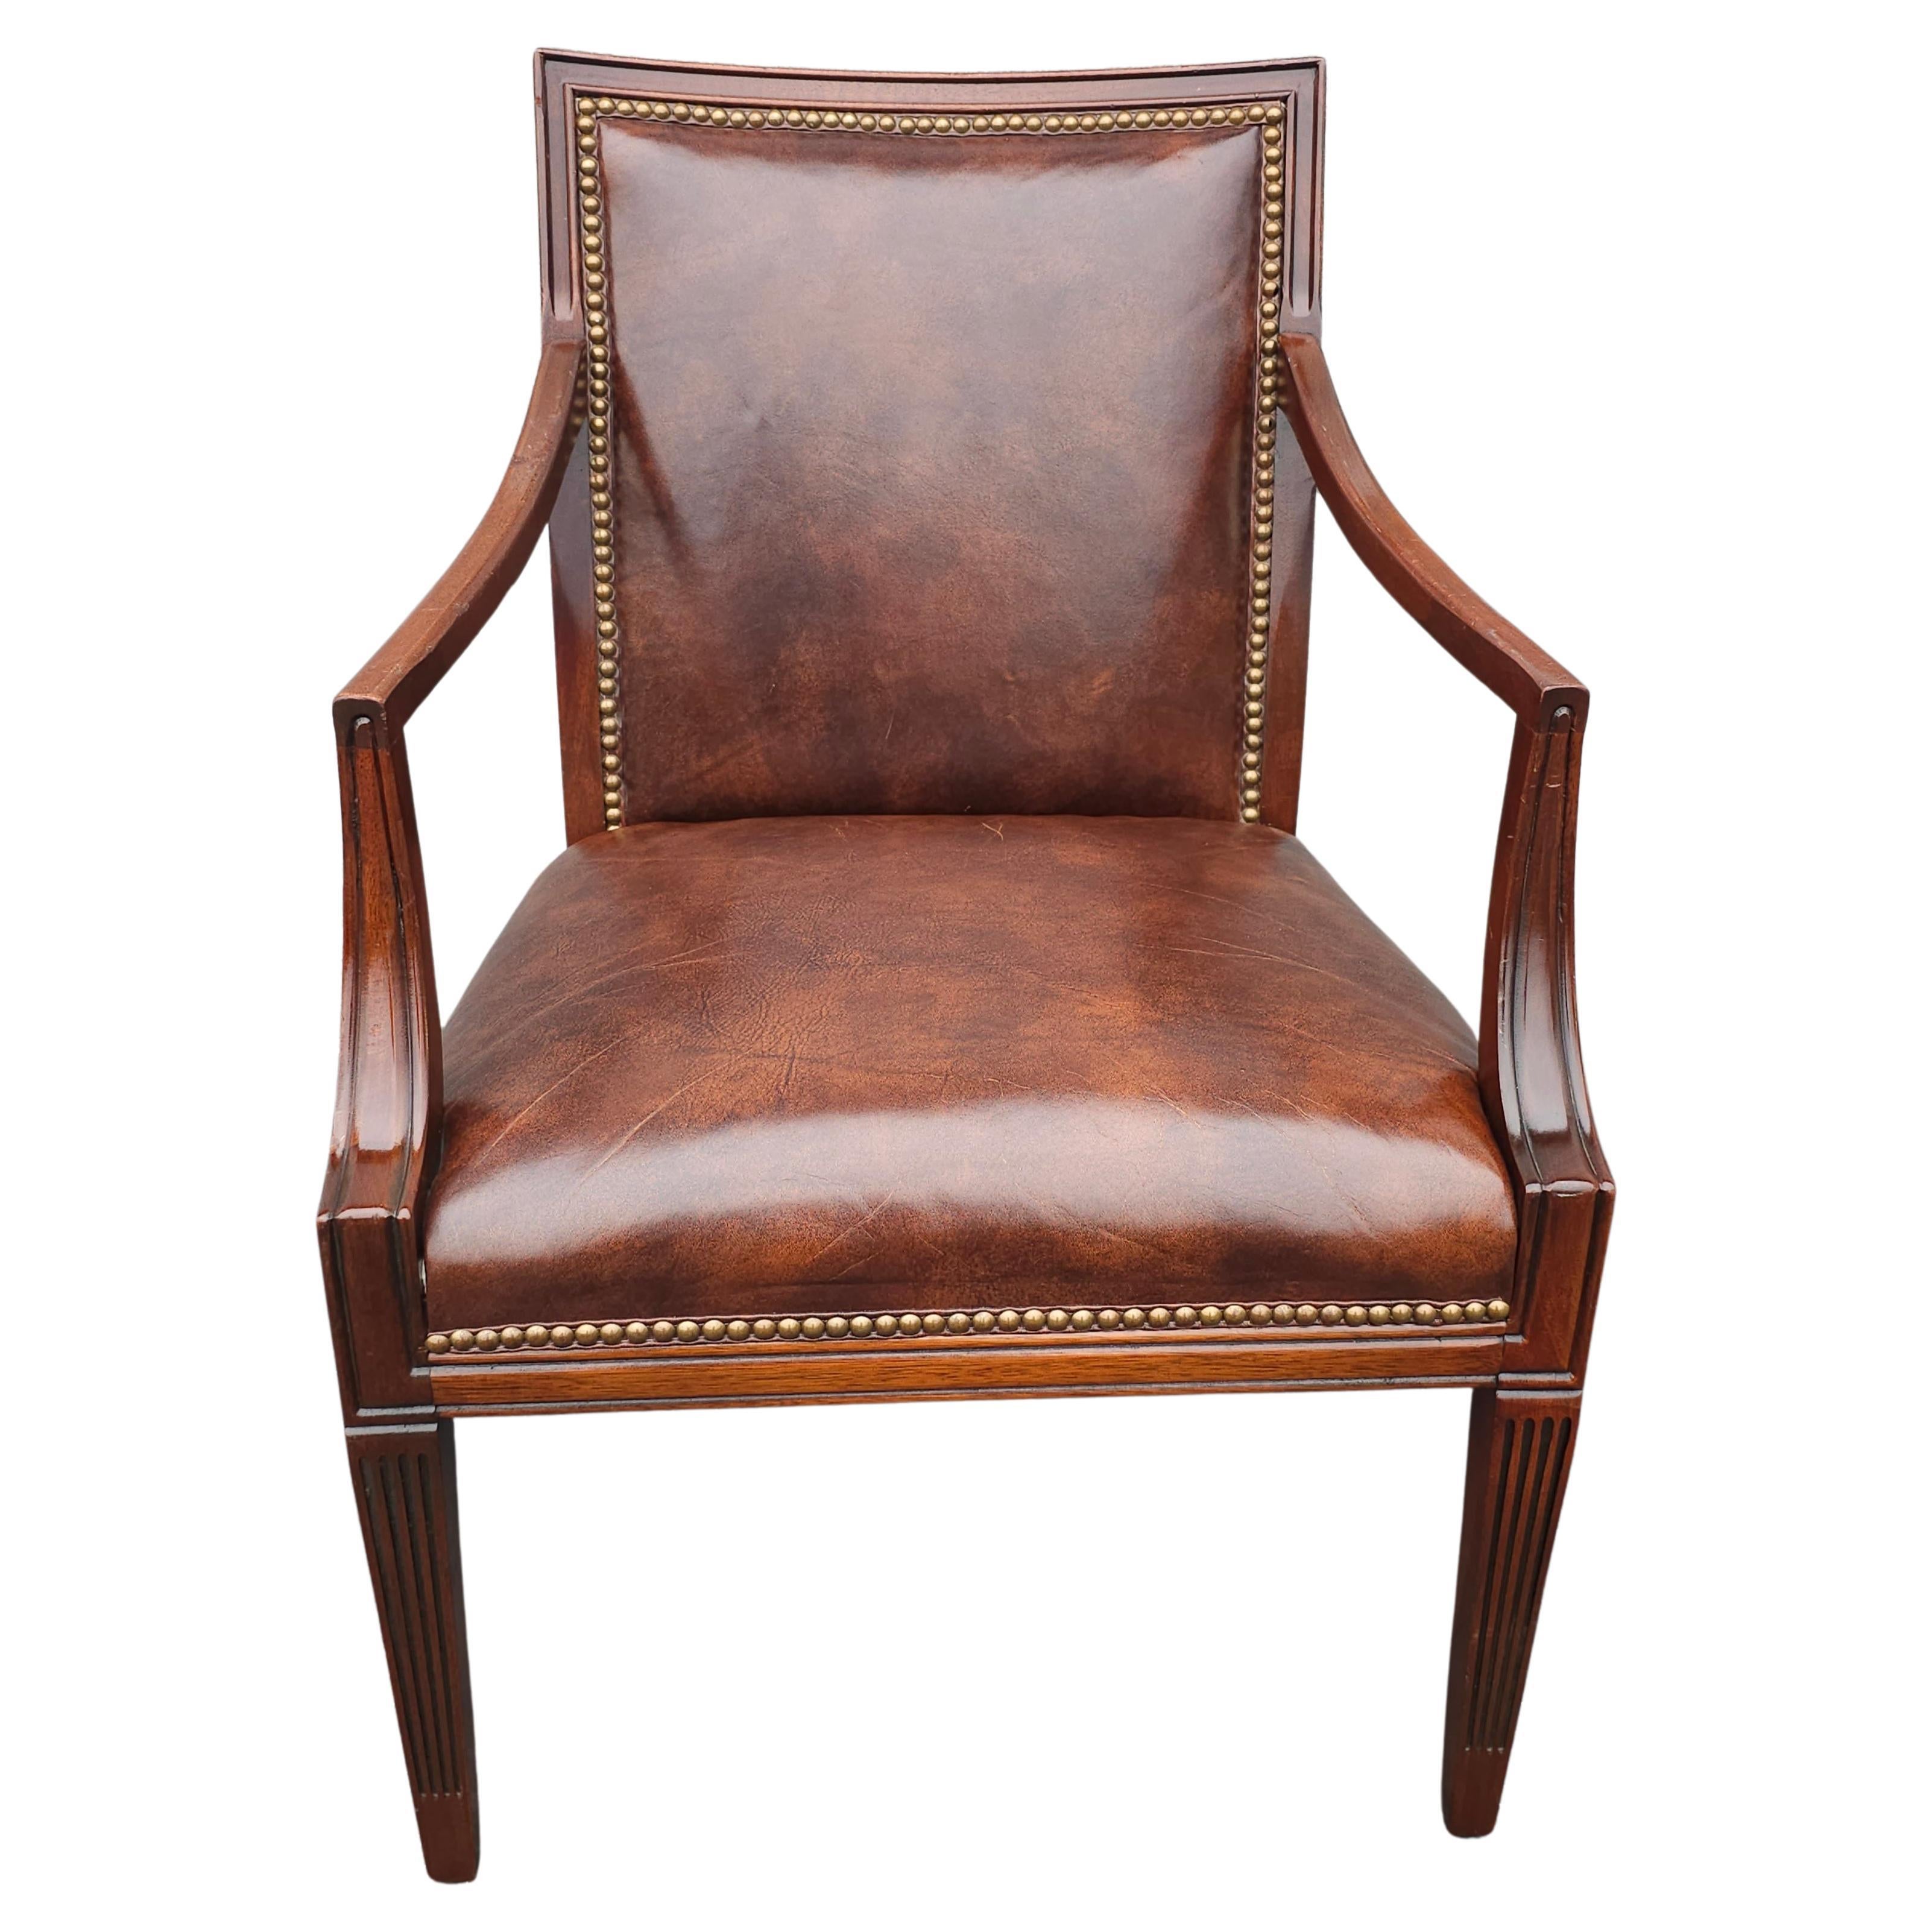 20th Century Stateville Chair Co. Mahogany and Leather Upholstered Armchair with nail head Trims. Measures 24